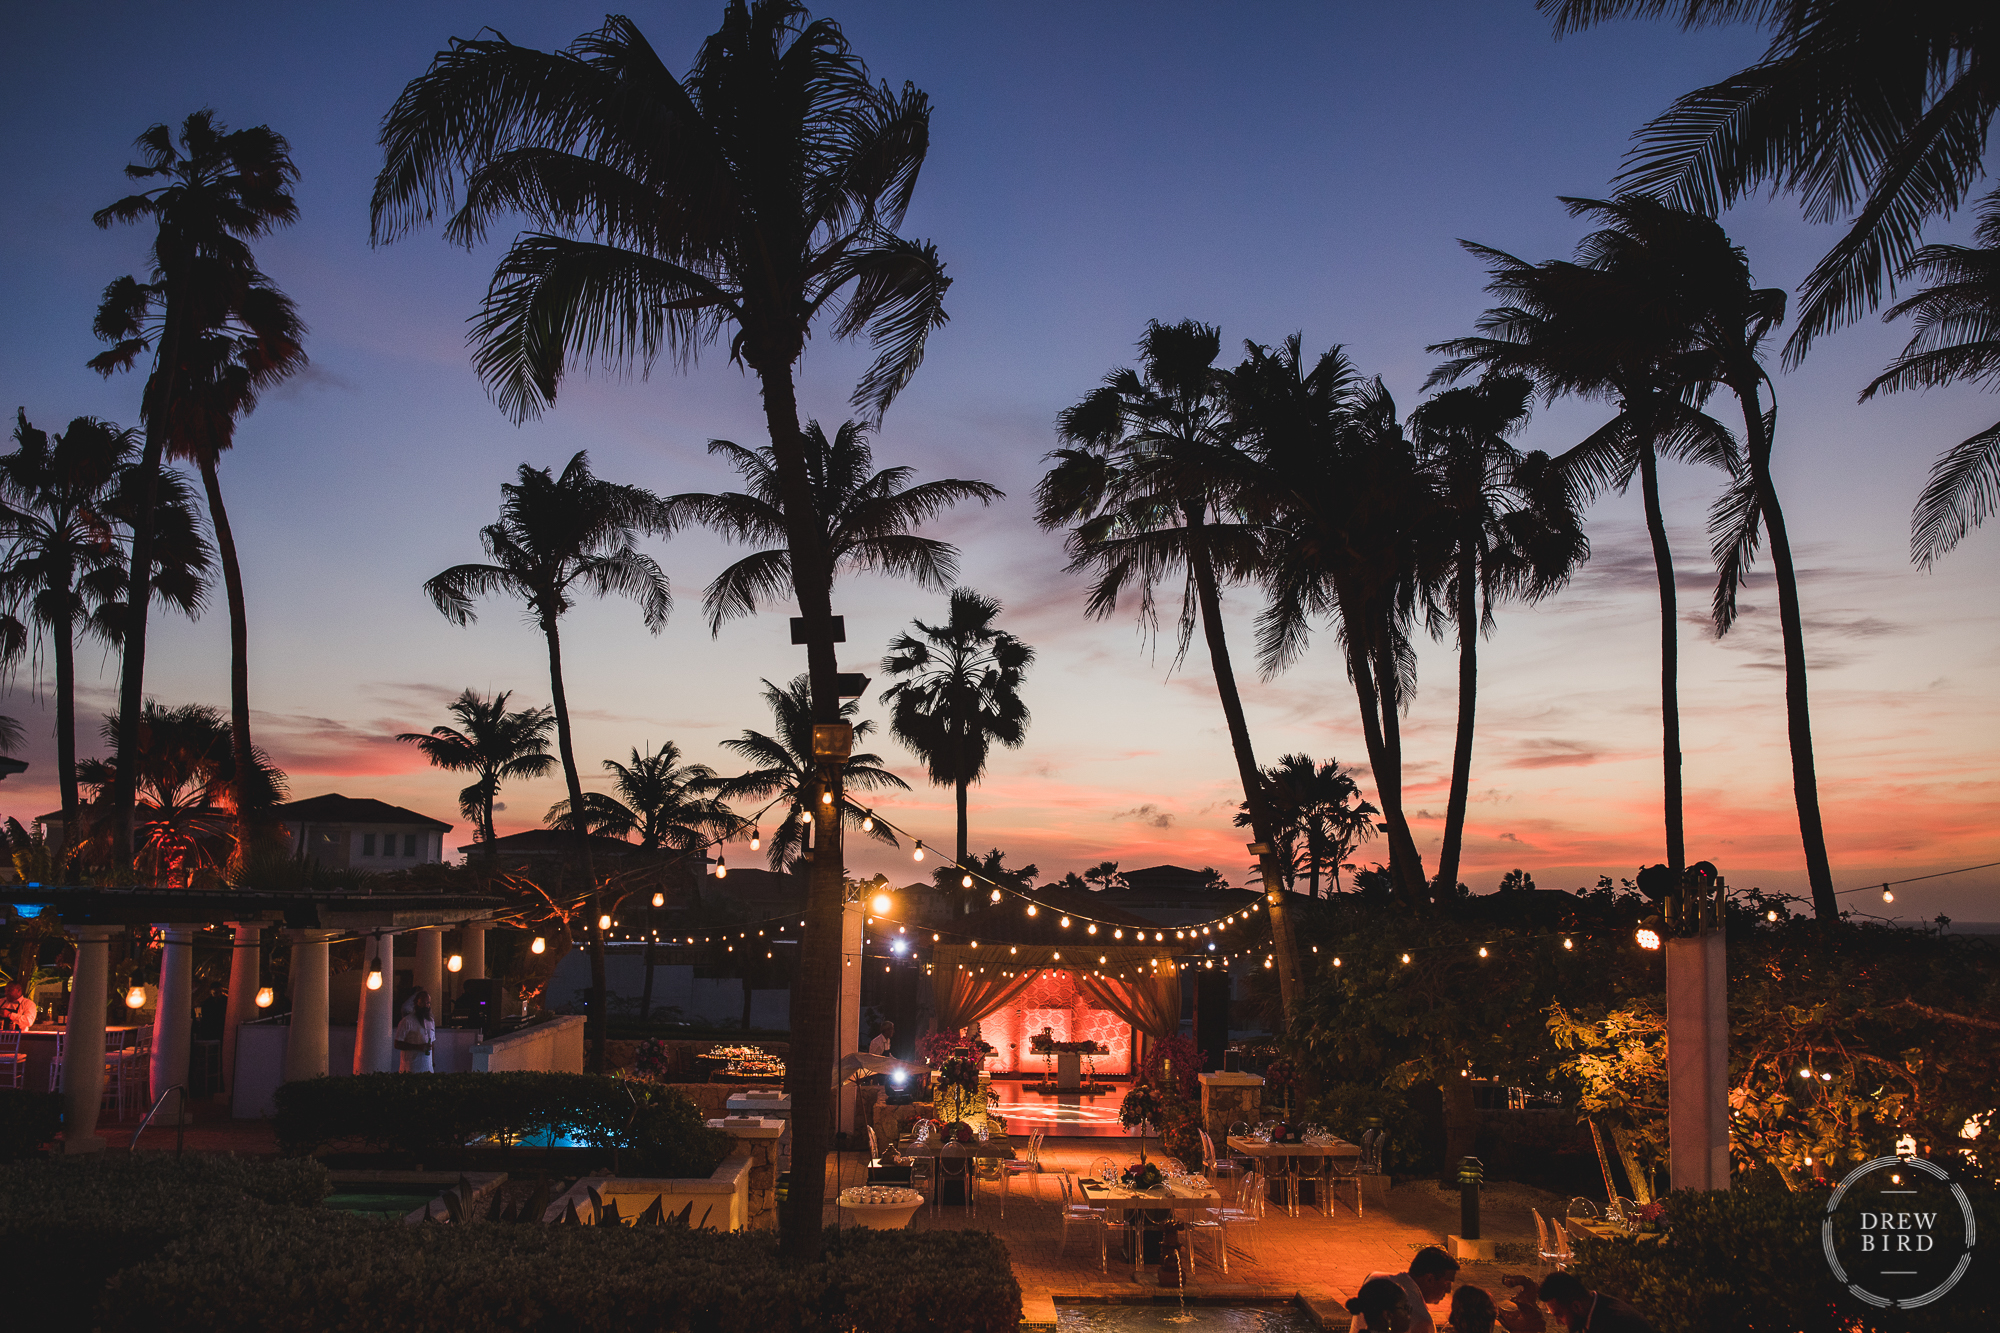 A stunning photo of Tierra del Sol, an elegant outdoor wedding reception venue and resort on the rugged north shore of Aruba in the Caribbean. Here, the dance floor and table settings are towered over by the silhouettes of palm trees against the sunset sky with colors of orange and red and pink.